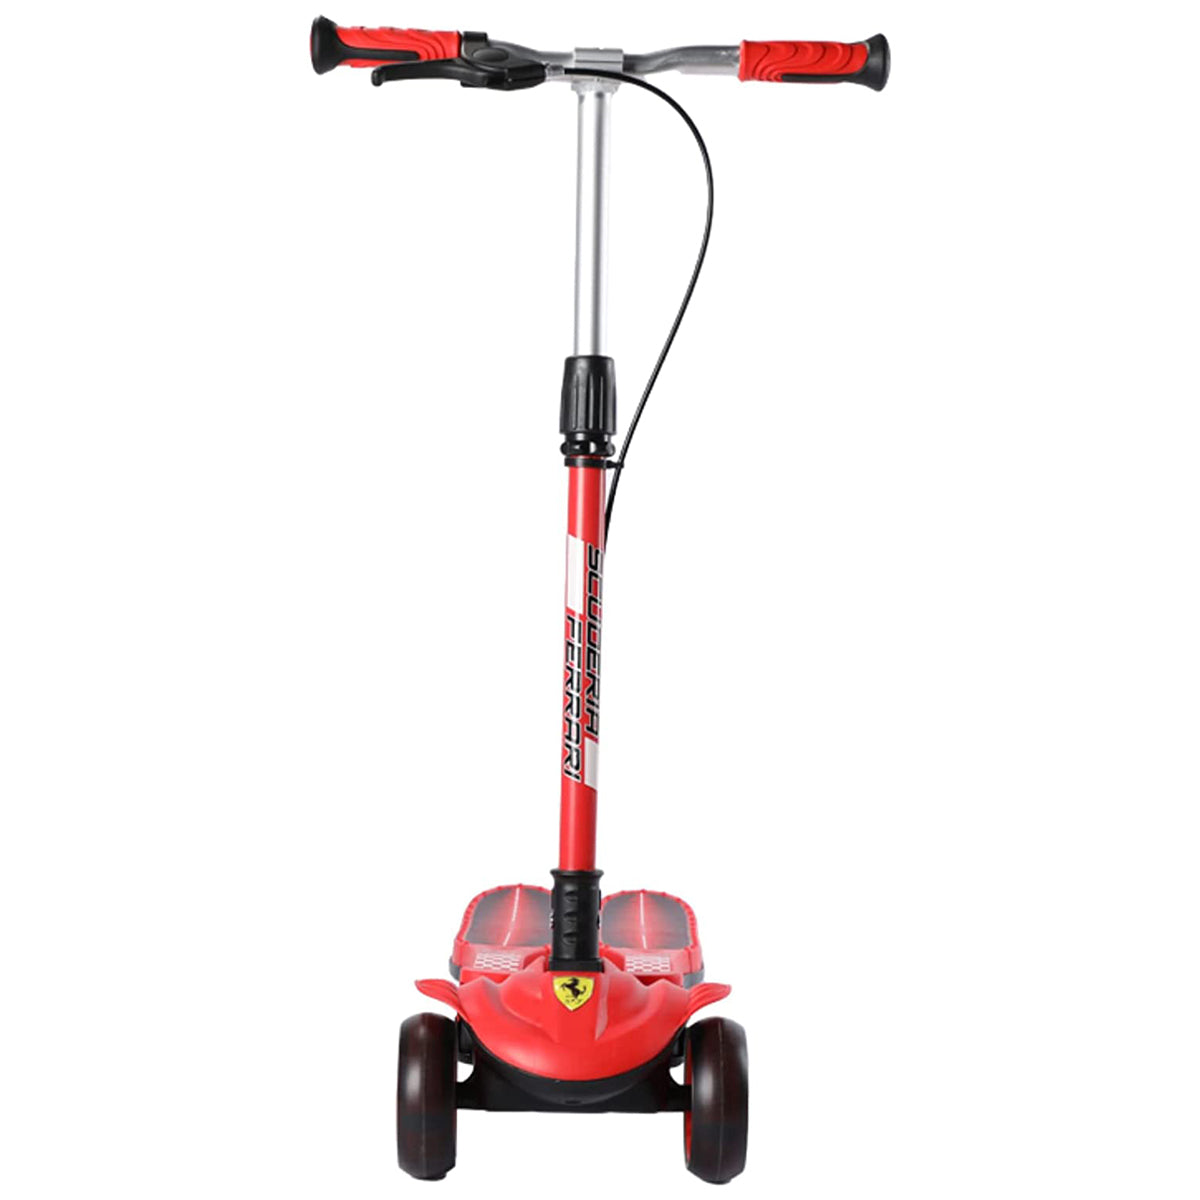 Ferrari - Frog Scooter For Kids With Adjustable Height (Red)